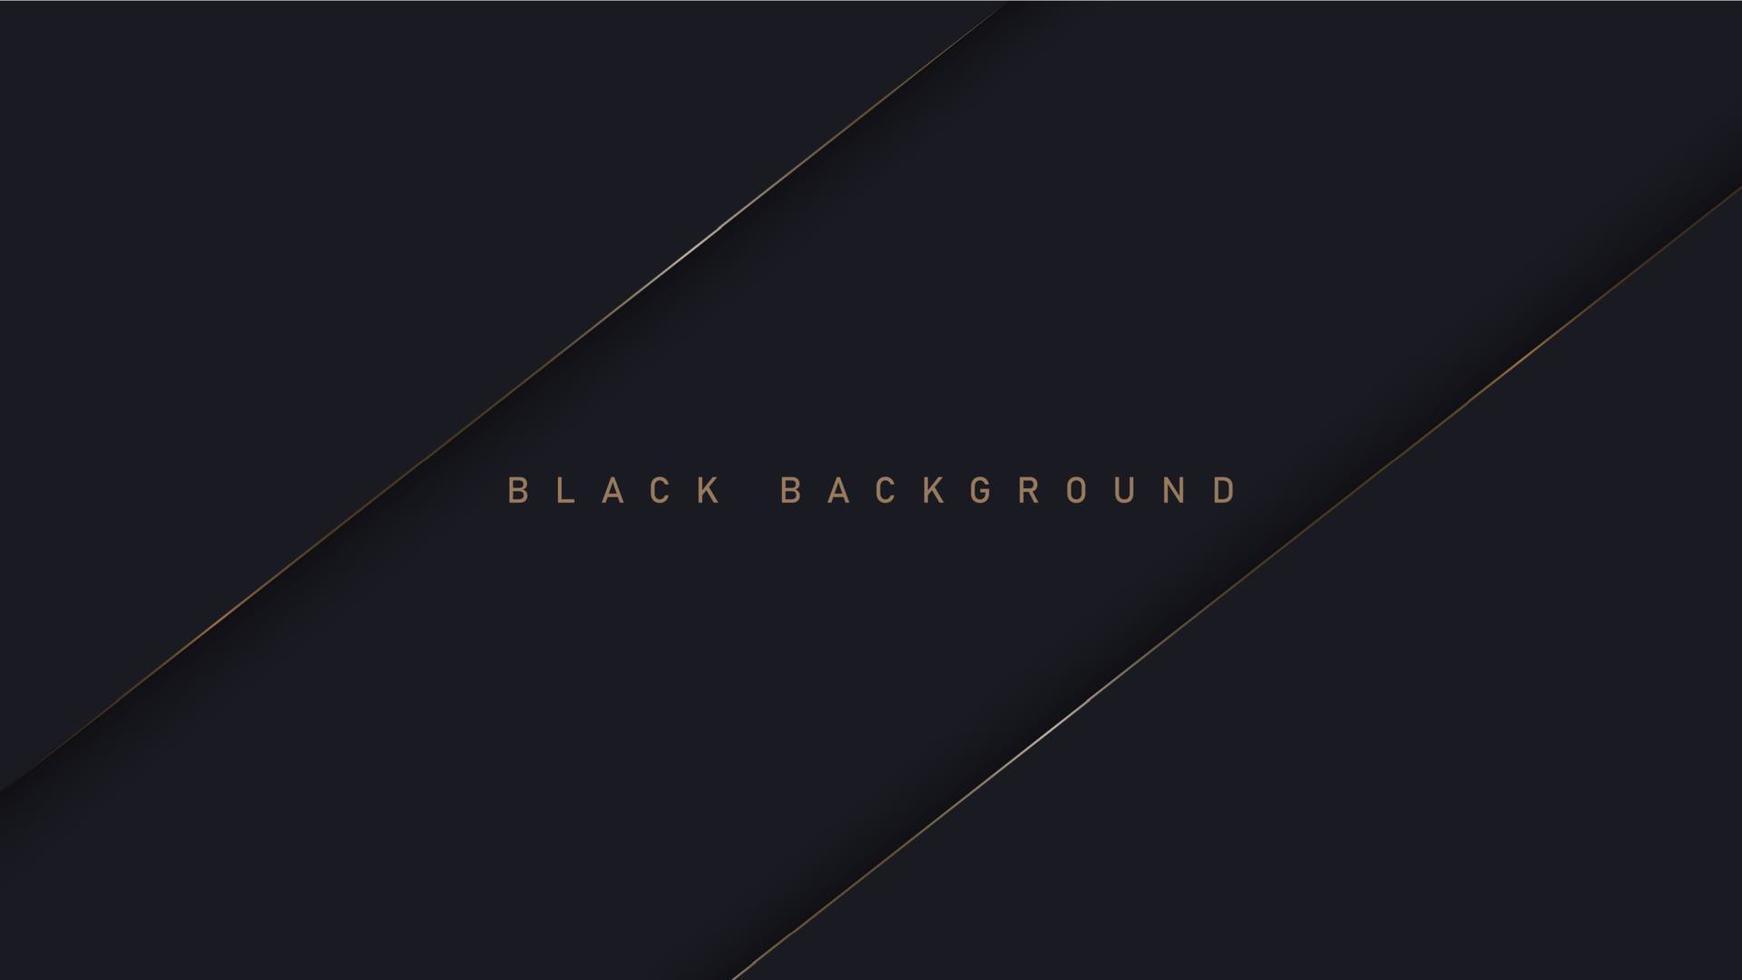 Black luxury background with shadow elements, template for your design vector